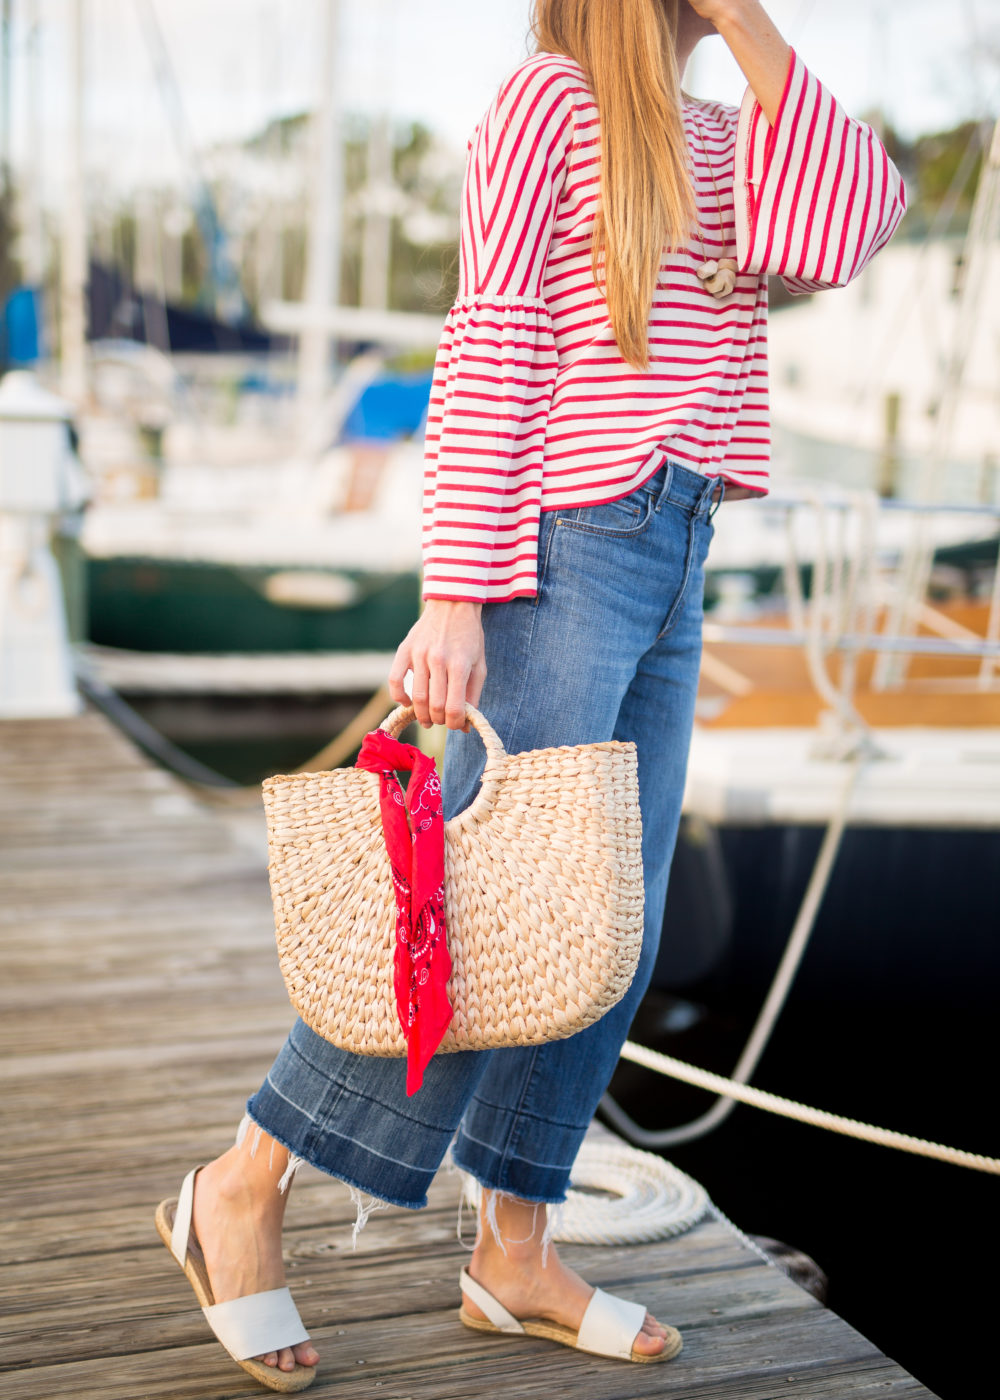 How to Dress Preppy on a Budget / Preppy Women's Outfits / Spring Outfits Preppy / Preppy Outfits Summer / Preppy Essentials / Red Striped Top / Where to Buy Preppy Clothes / Straw Bag / Second Hand Preppy Clothes -Sunshine Style, A Florida Fashion and Lifestyle Blog